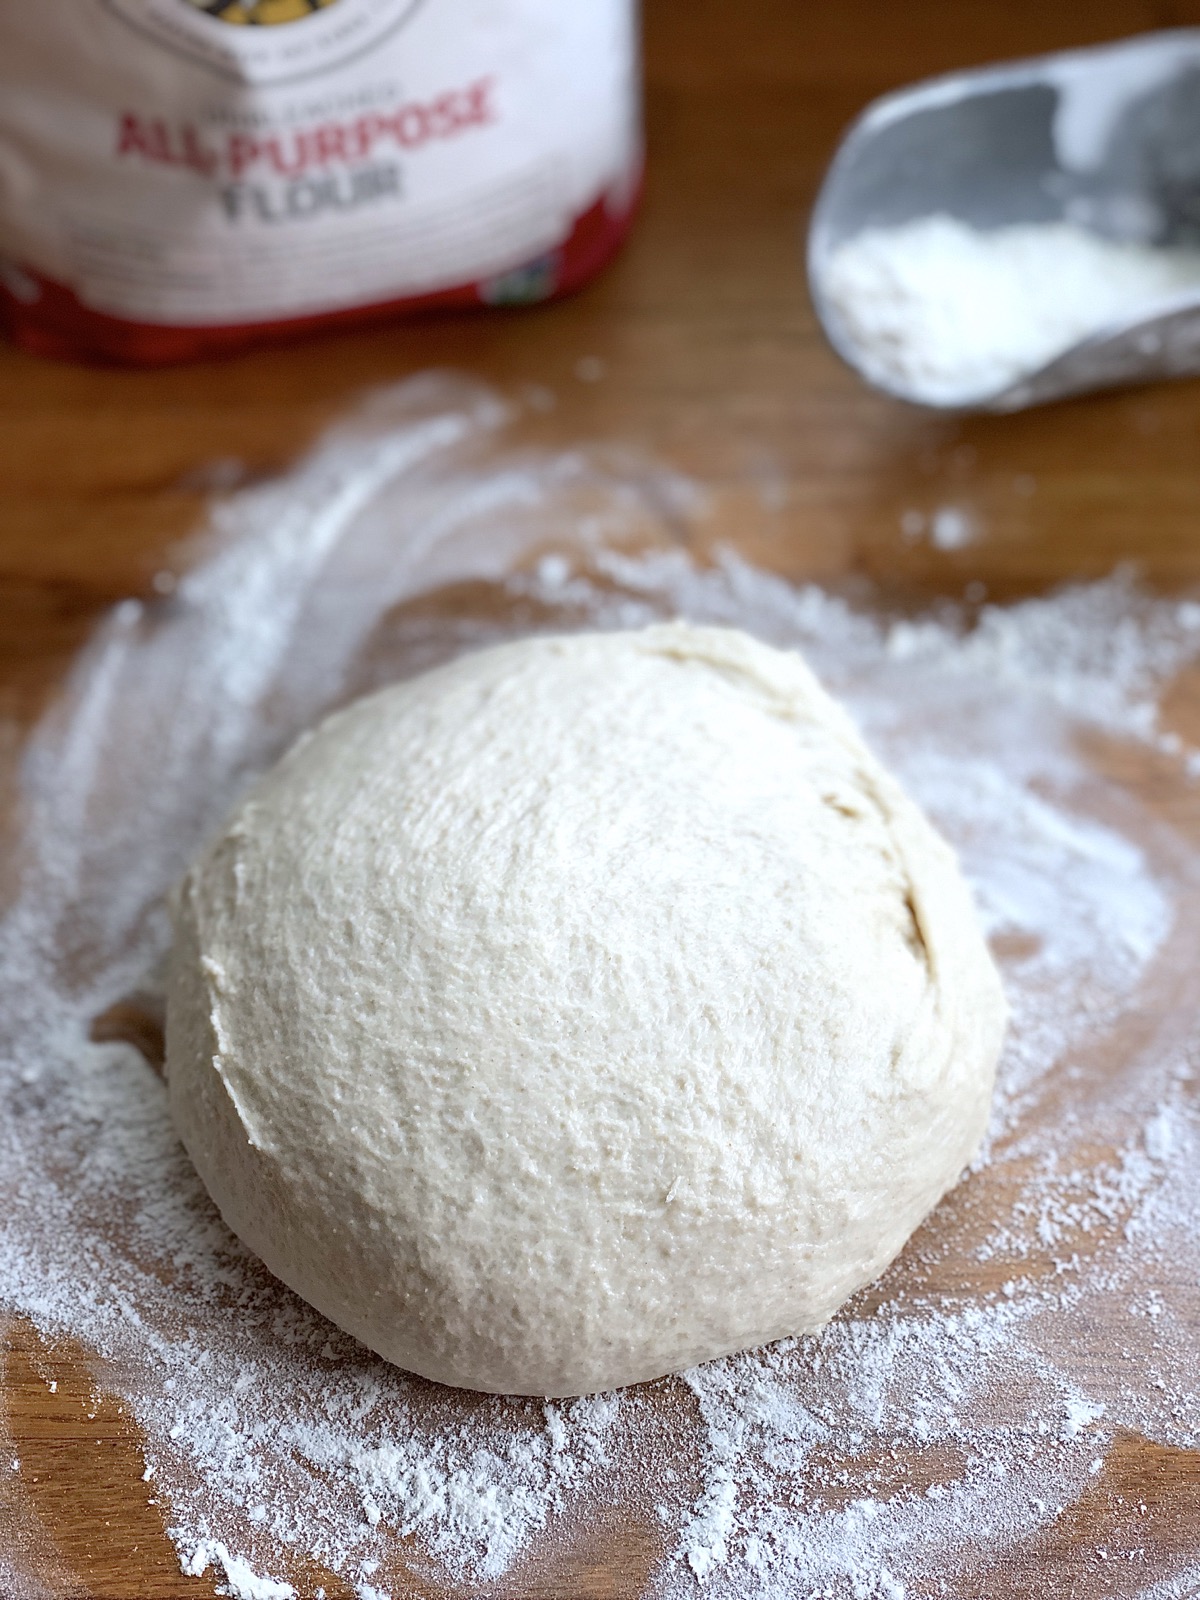 Dough made from yeast water starter on a floured wooden kneading surface.